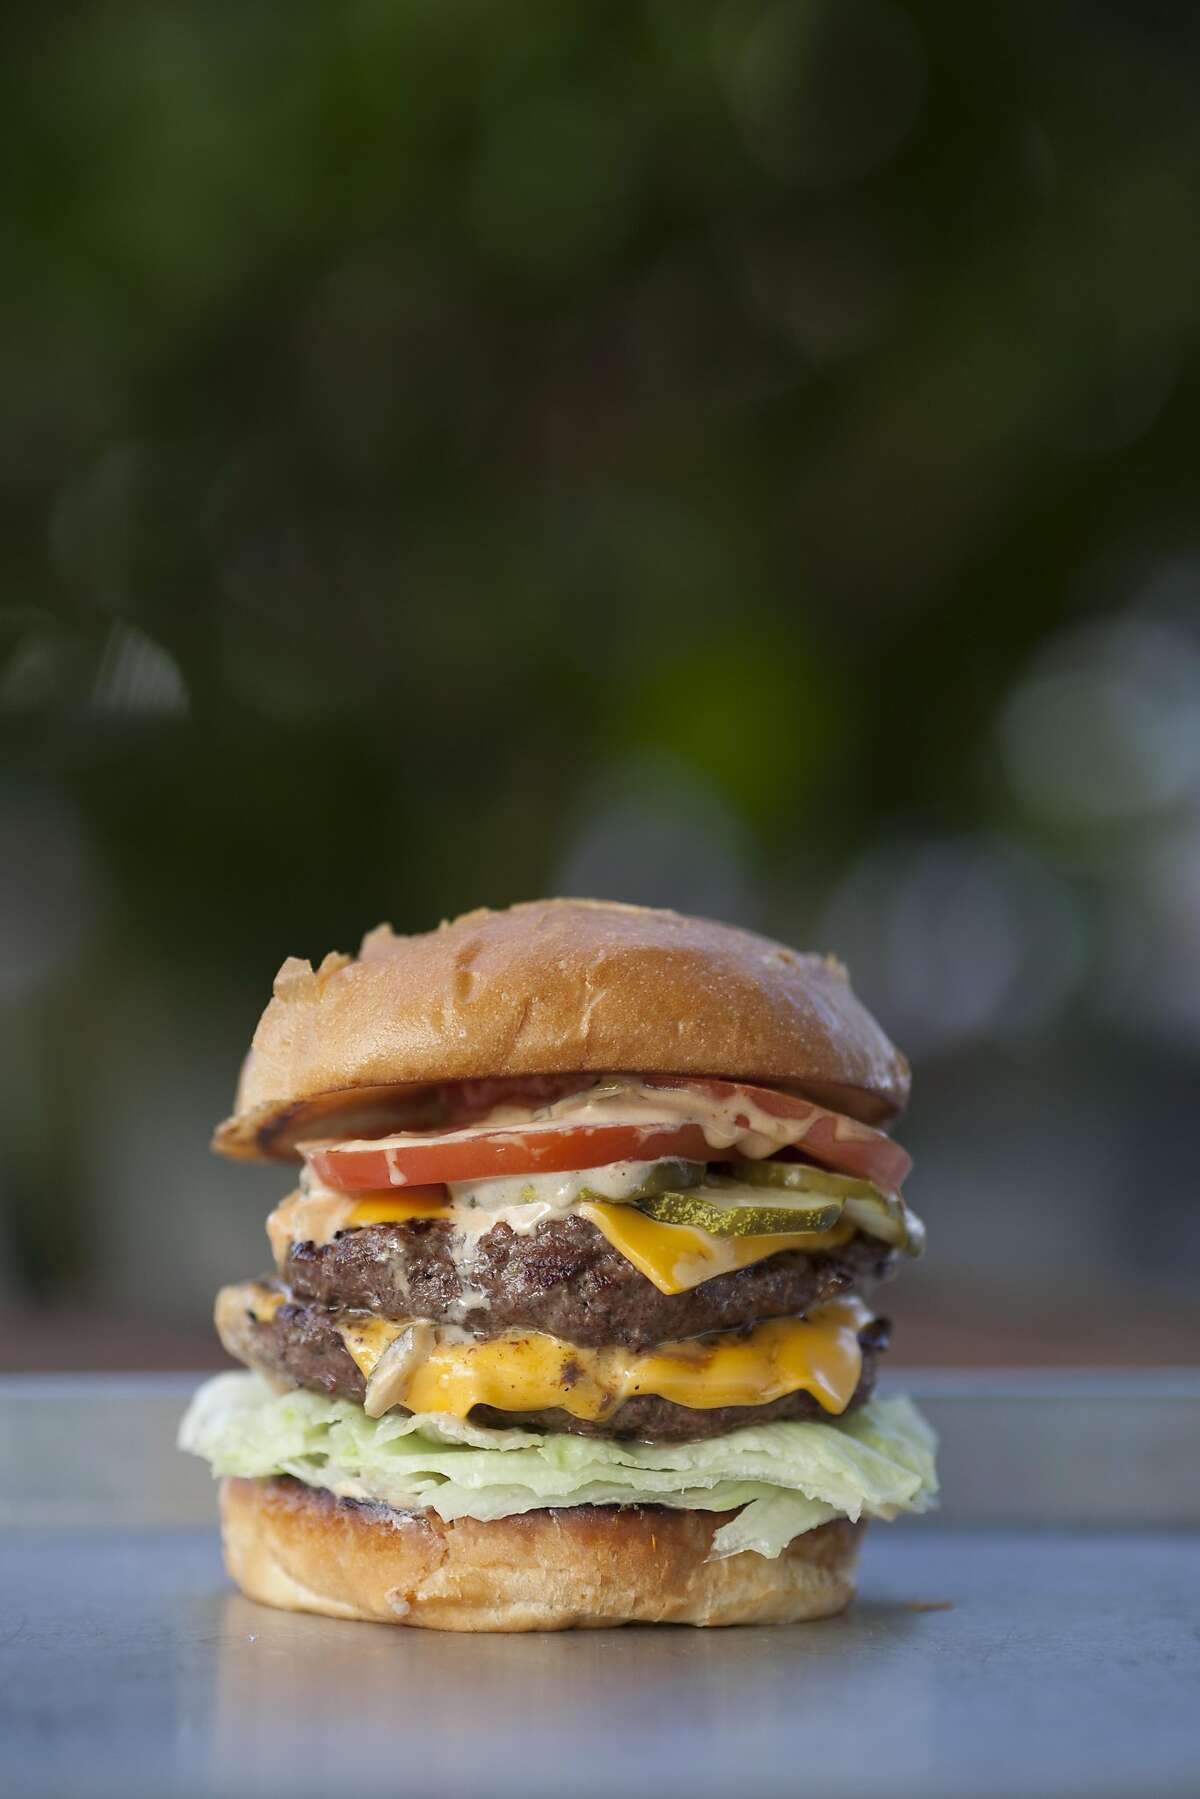 Double cheeseburger from Gott�s Roadside in Napa, California, USA 12 Oct 2016. (Peter DaSilva/Special to The Chronicle)